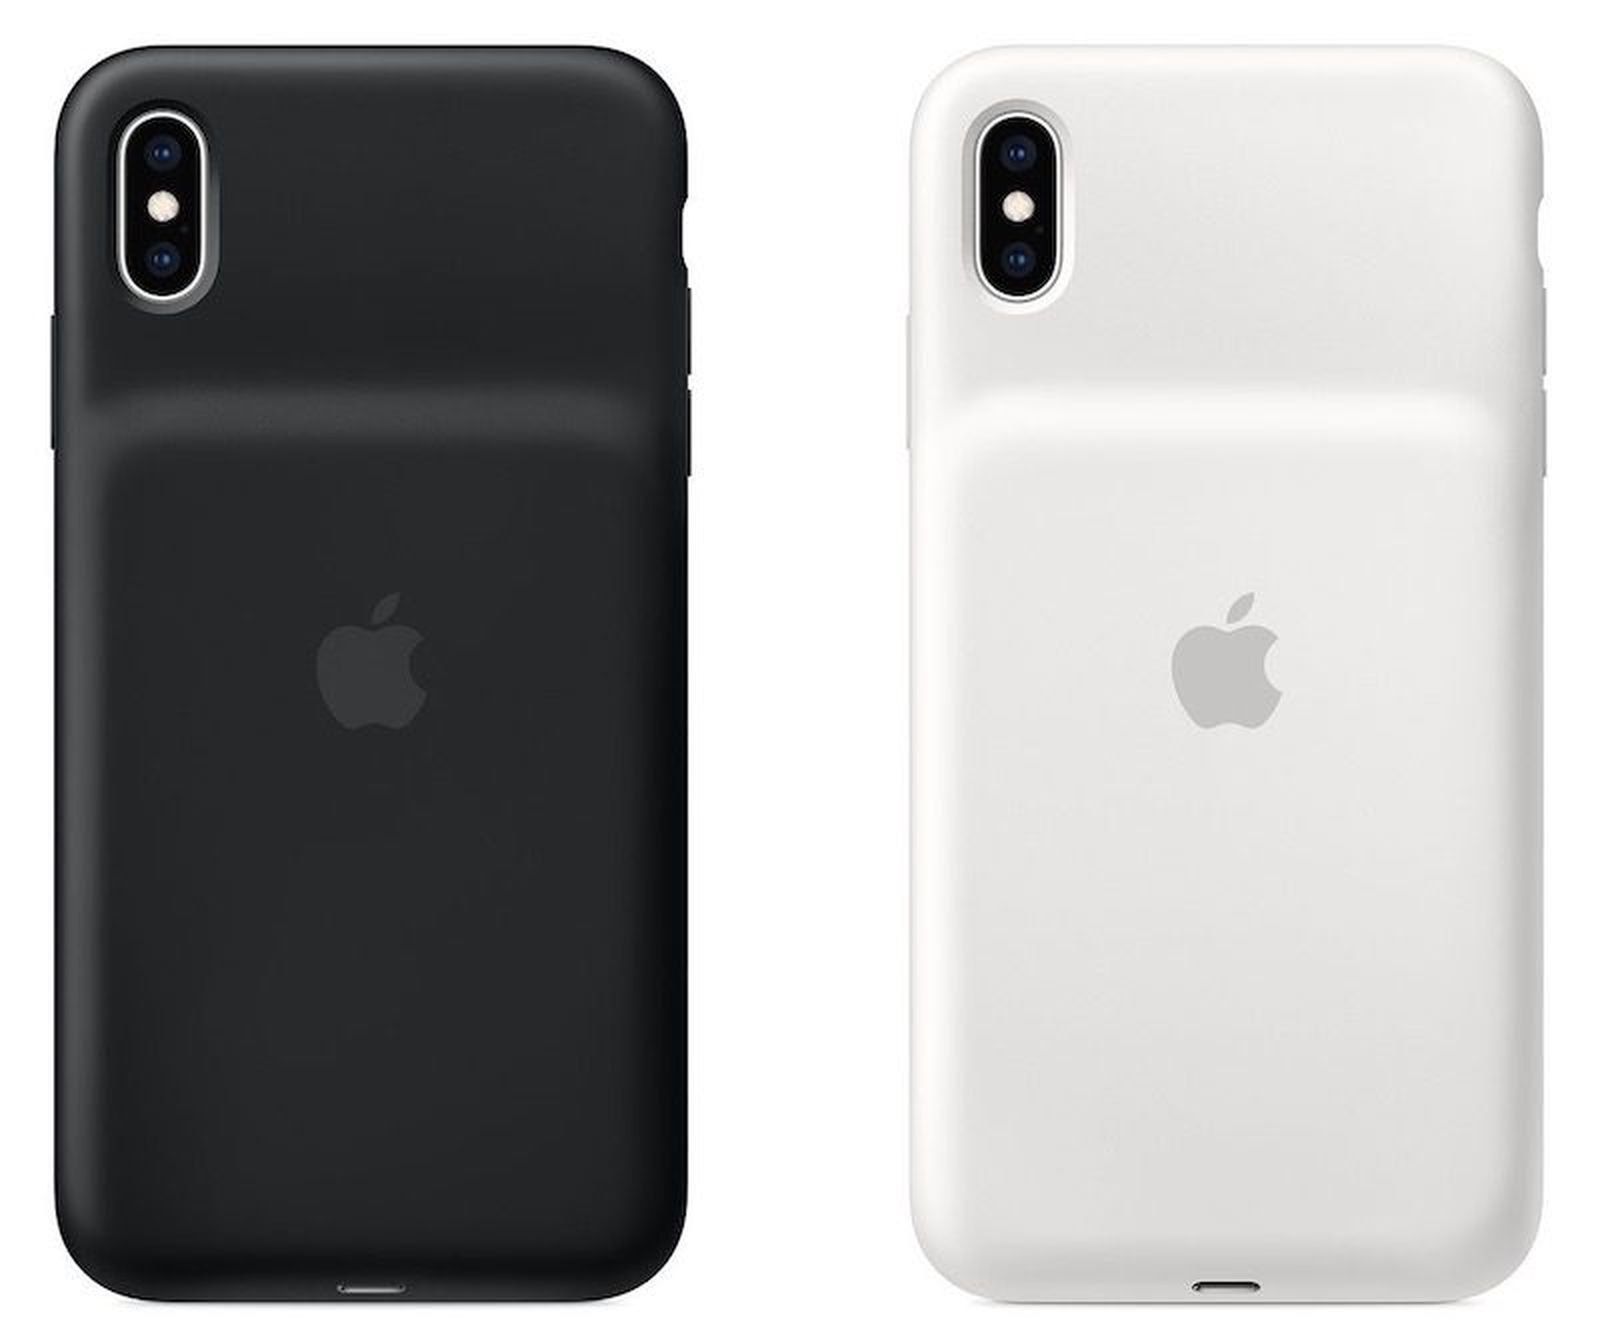 Apple Releases Smart Battery Cases for iPhone XS, XS Max and XR ...